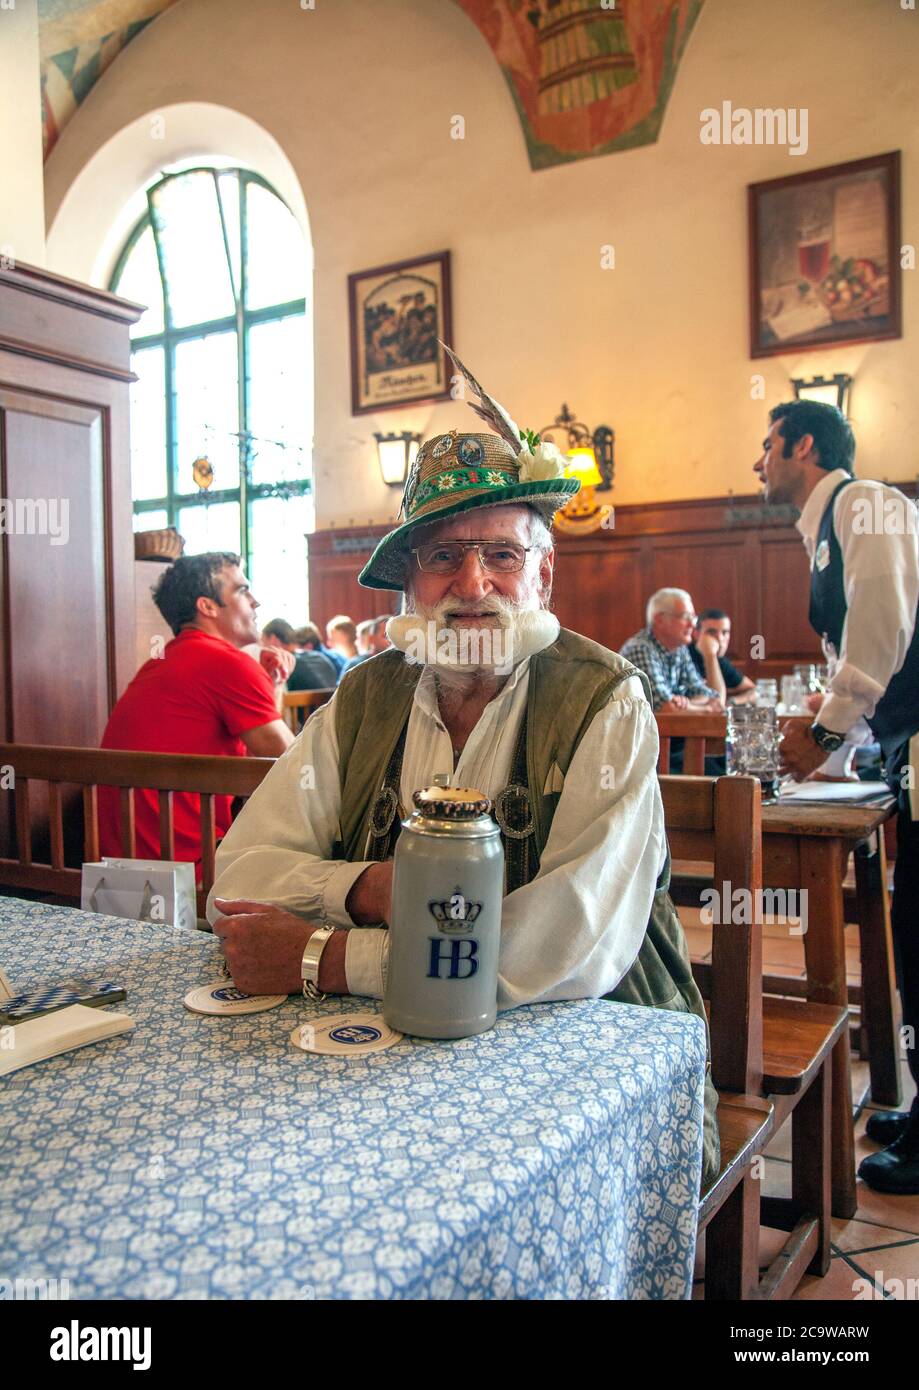 Properly outfitted gentleman, Hofbrauhaus, Munich, Bavaria, Germany..  He may be one of this tavern's regulars, groups of men in Bavarian-style clothi Stock Photo